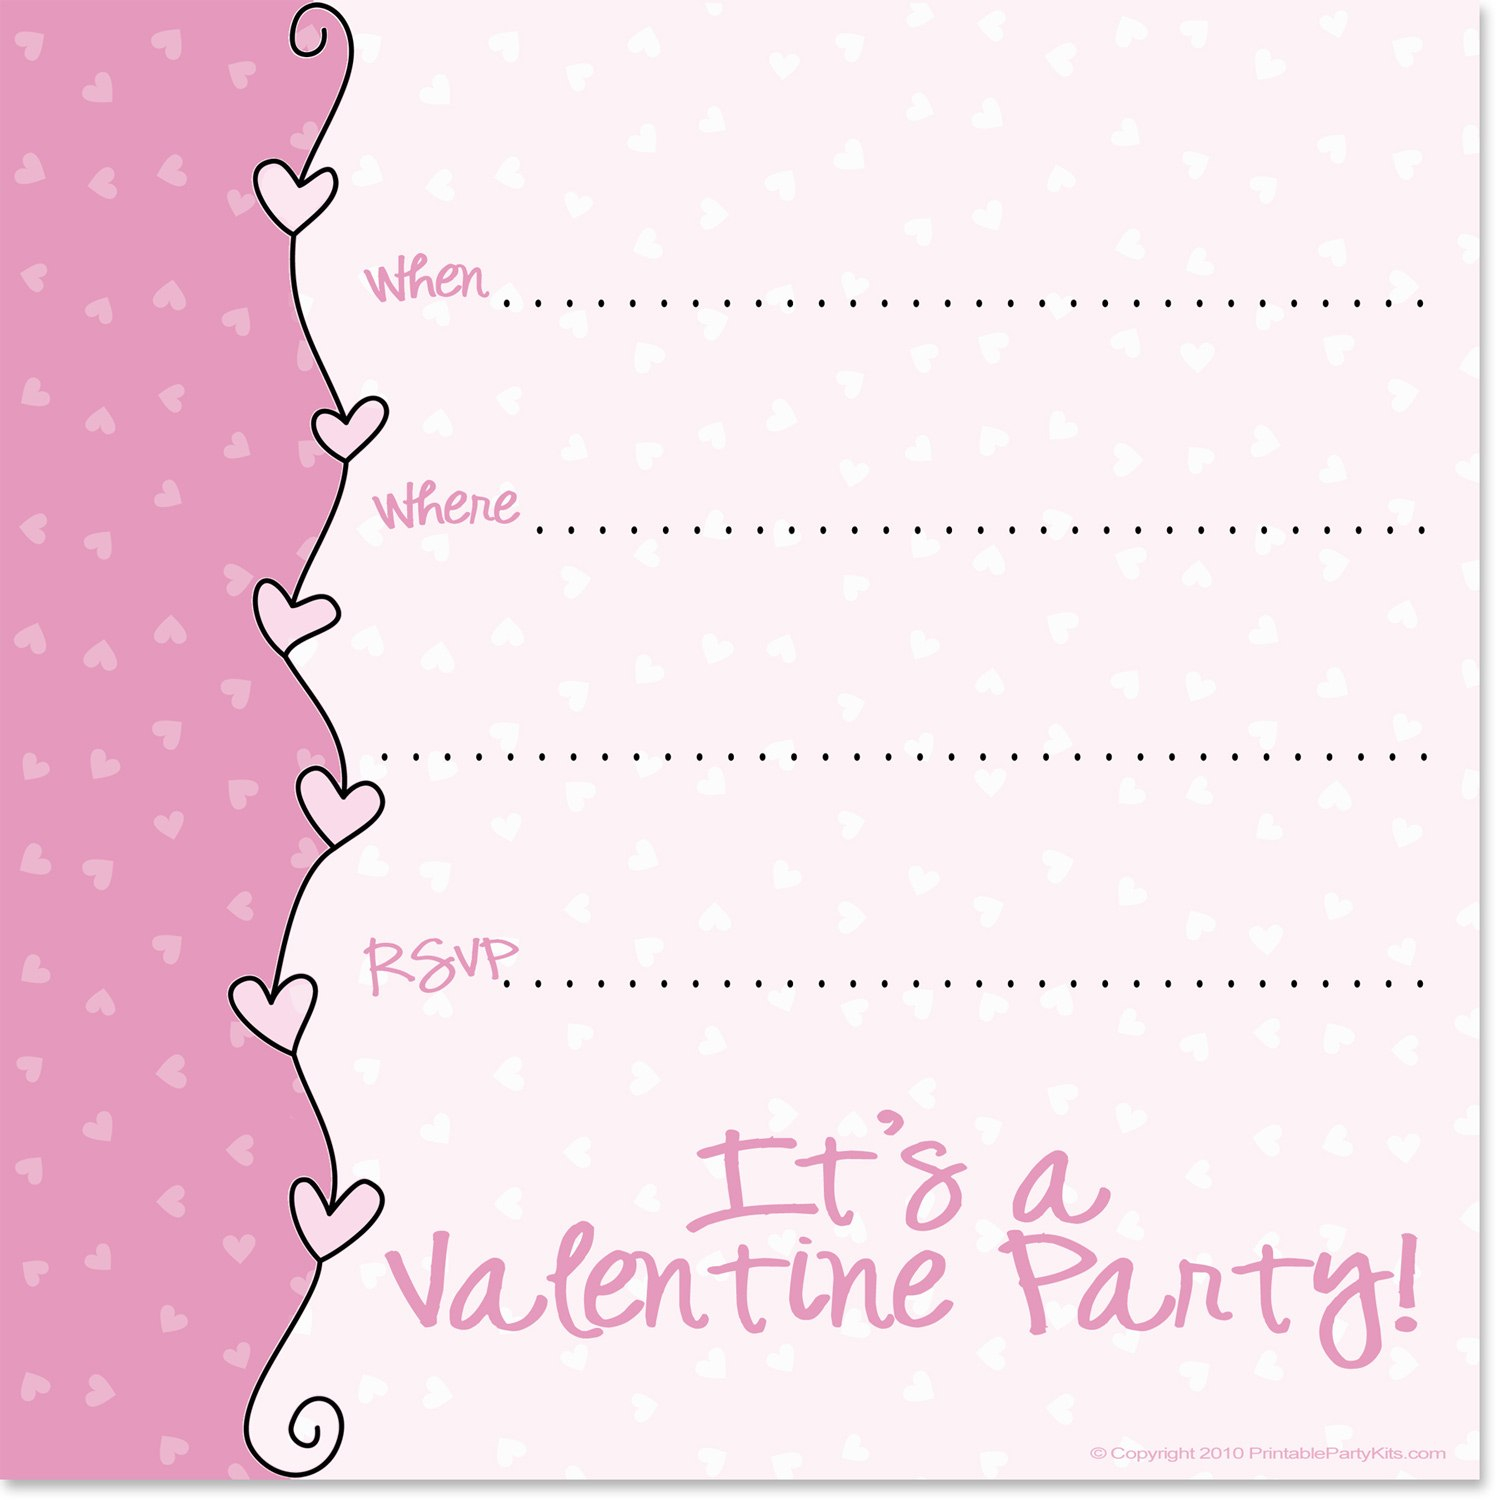 Free Printable Party Invitations Invitation Design For A intended for Valentine Party Invitation Template